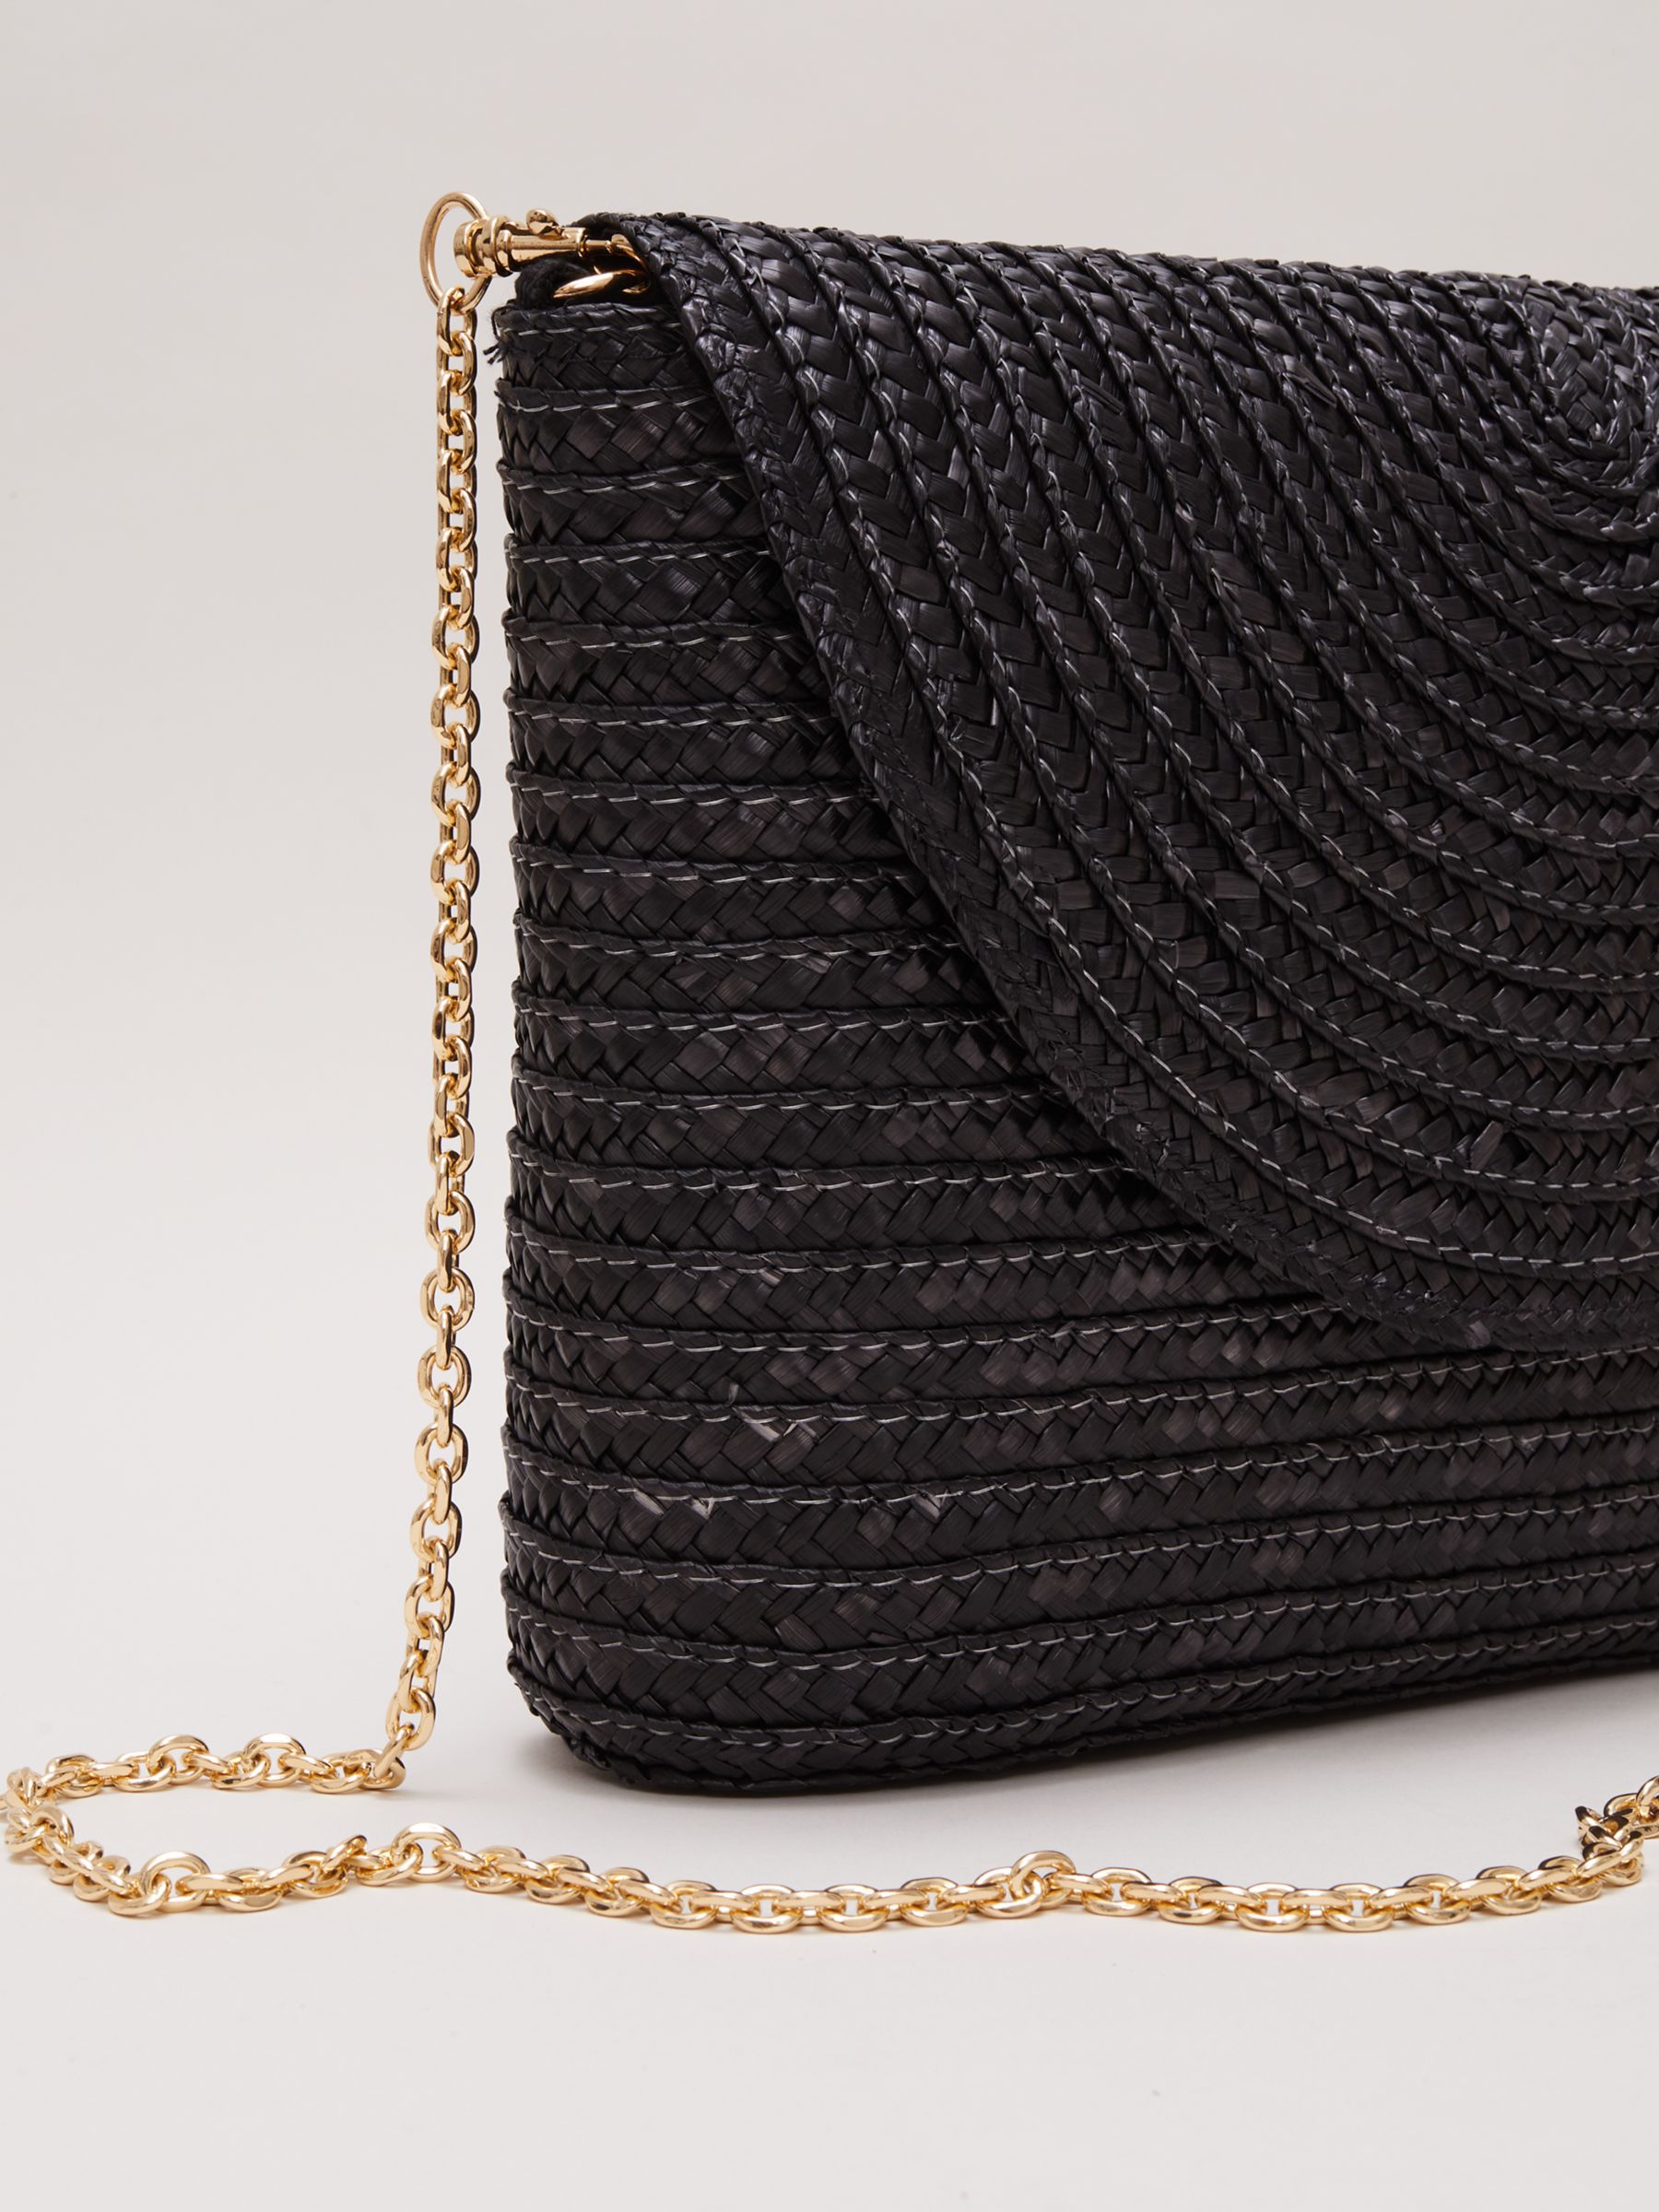 Phase Eight  Oversized Straw Clutch Bag, Black, One Size